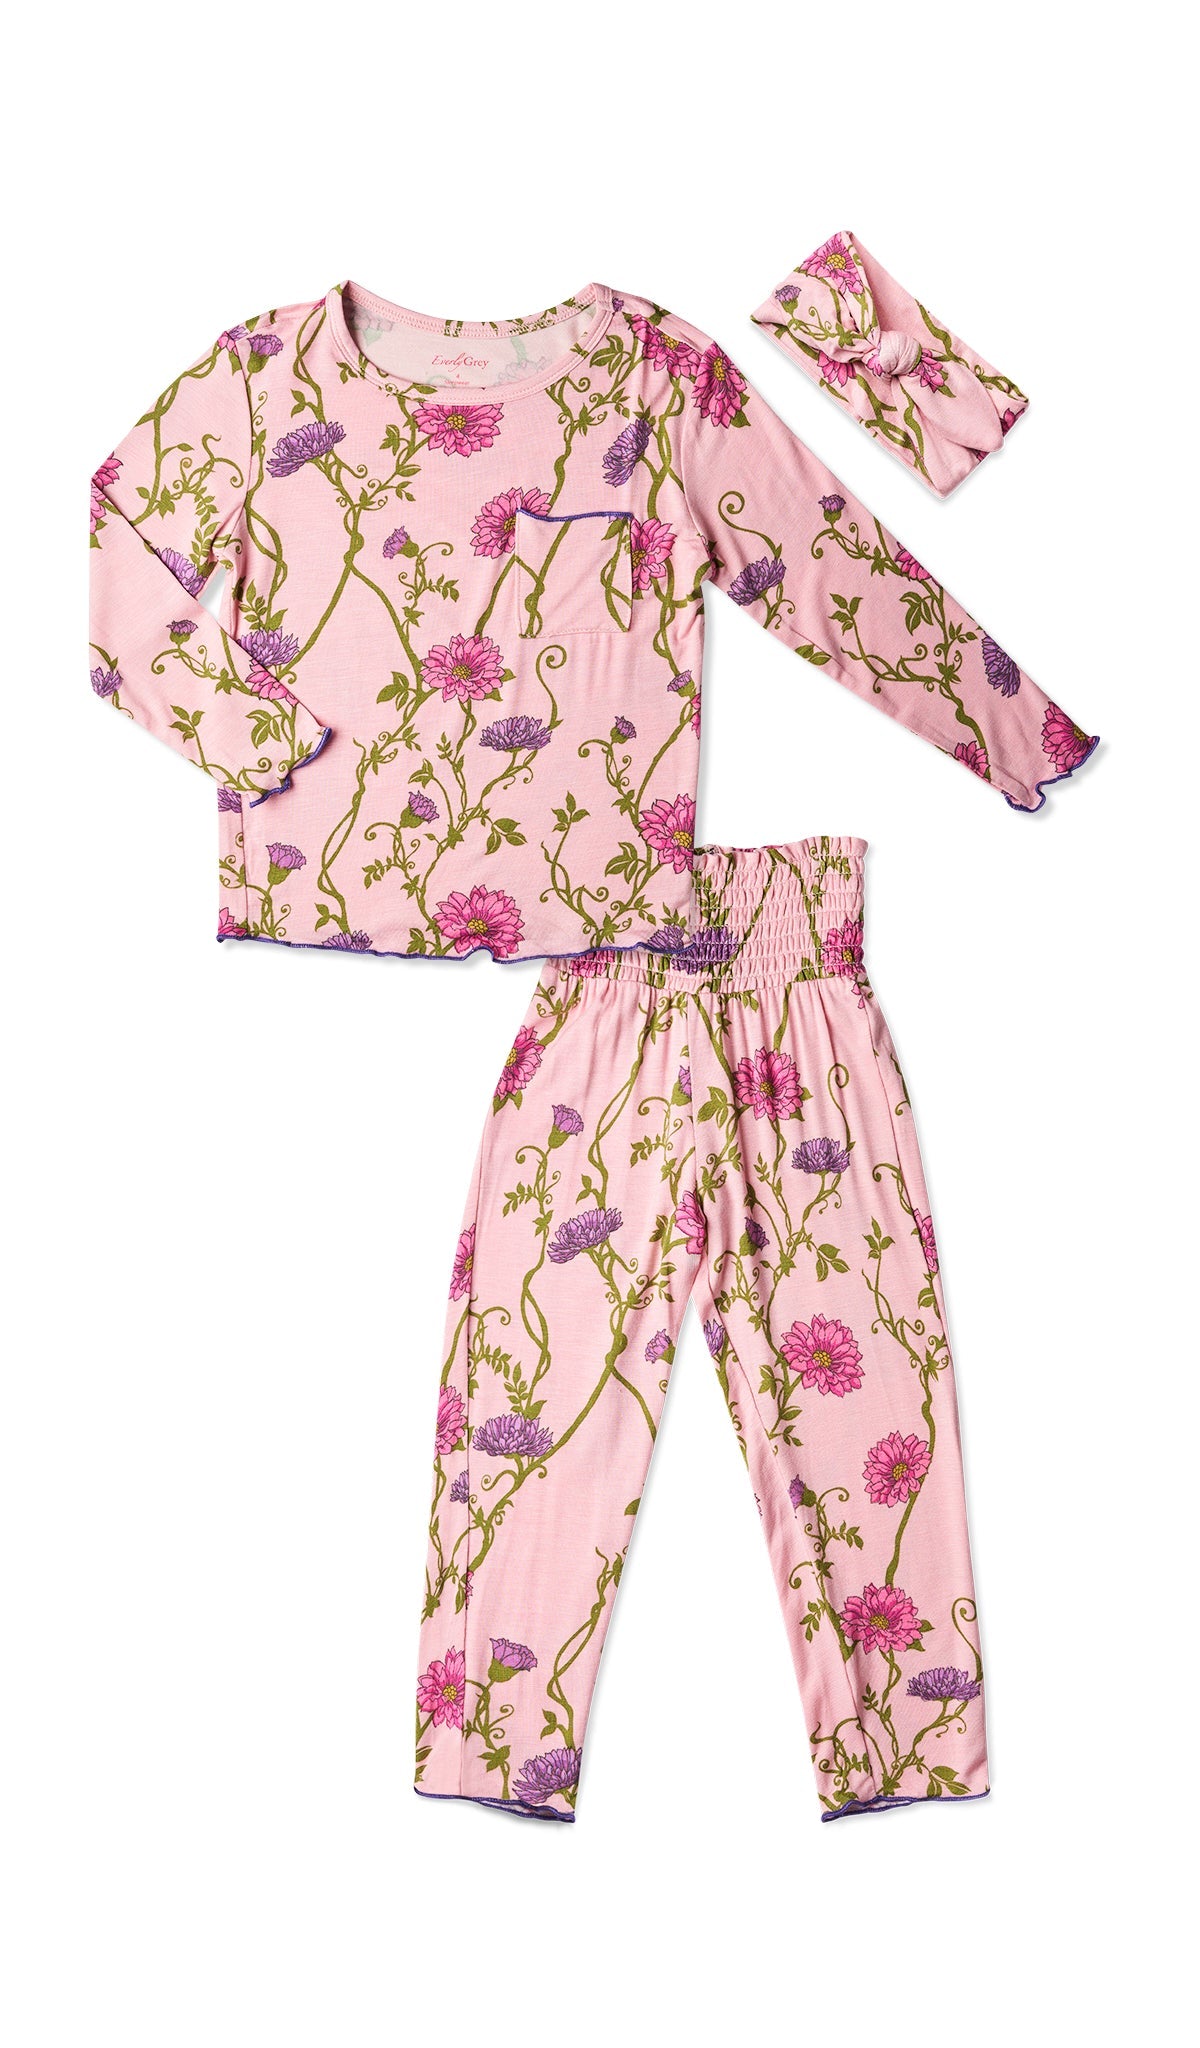 Dahlia Charlie Baby 3-Piece Pant PJ. Long sleeve top with smocked waistband pant and matching headwrap. Lettuce trim detail on sleeve edge, top and pant hem.